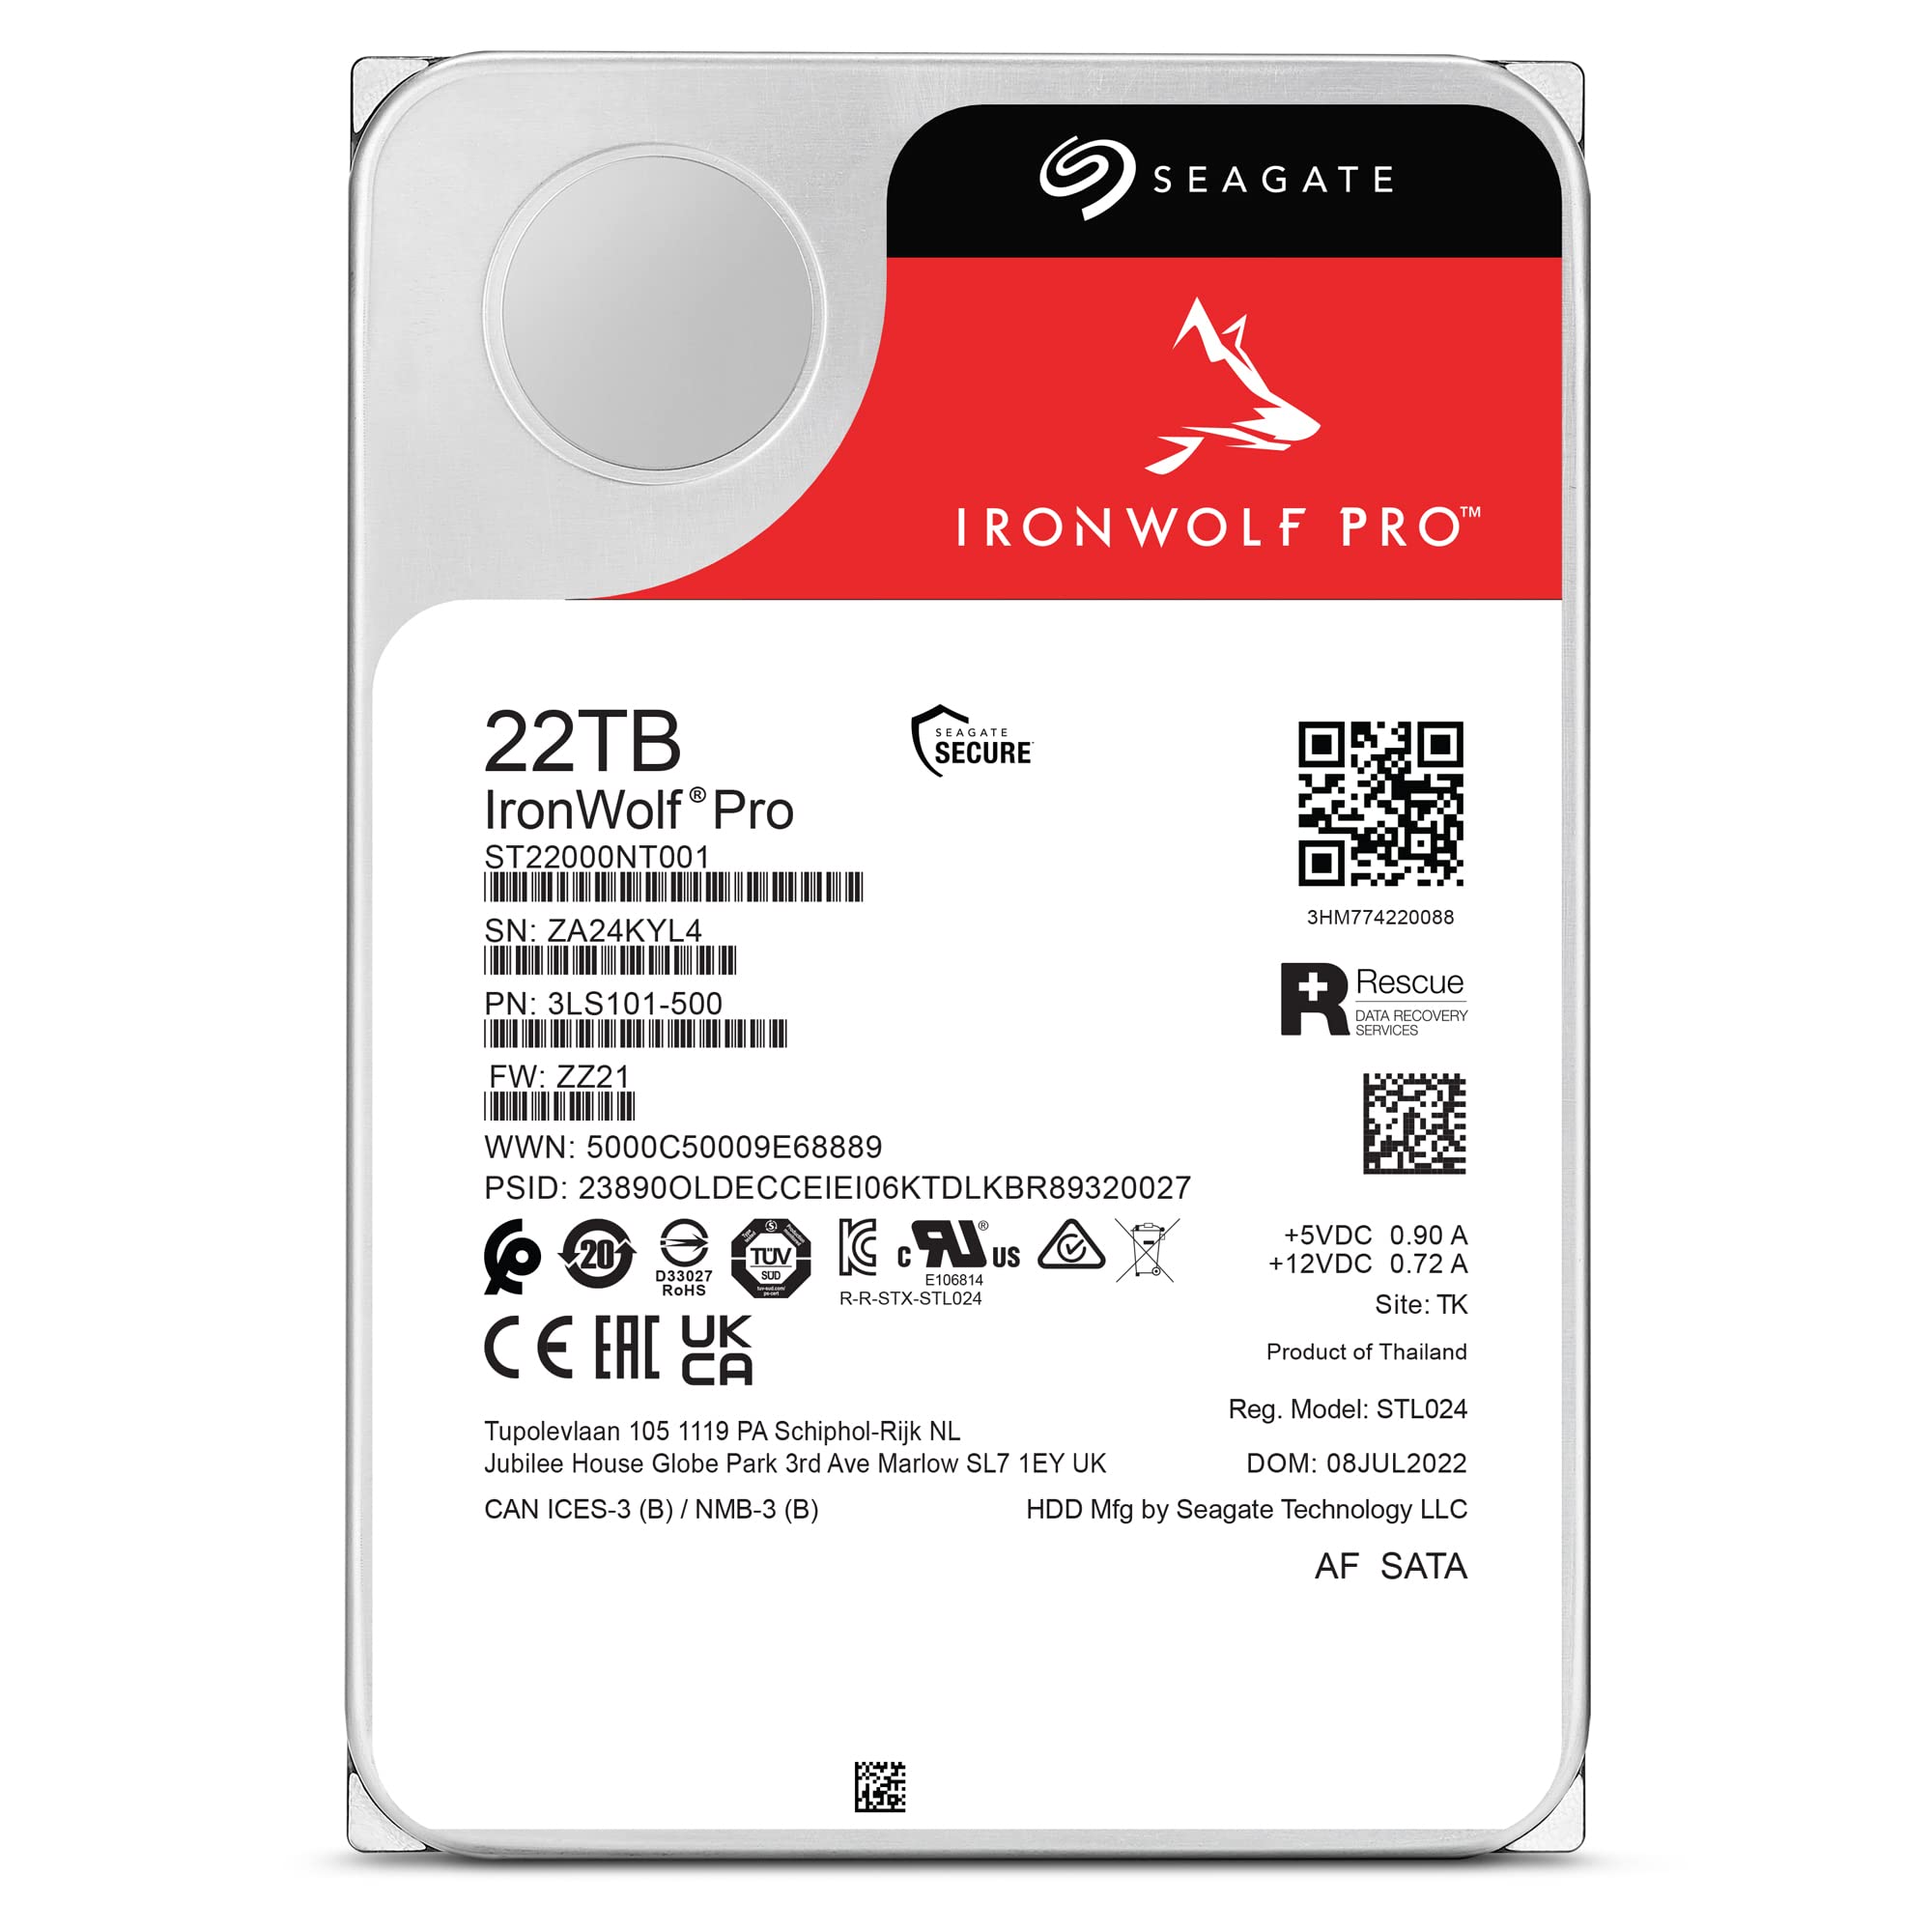 Seagate IronWolf Pro 22TB Enterprise NAS Internal HDD Hard Drive – CMR 3.5 Inch SATA 6Gb/s 7200 RPM 256MB Cache for RAID Network Attached Storage, Rescue Services (ST22000NT001)